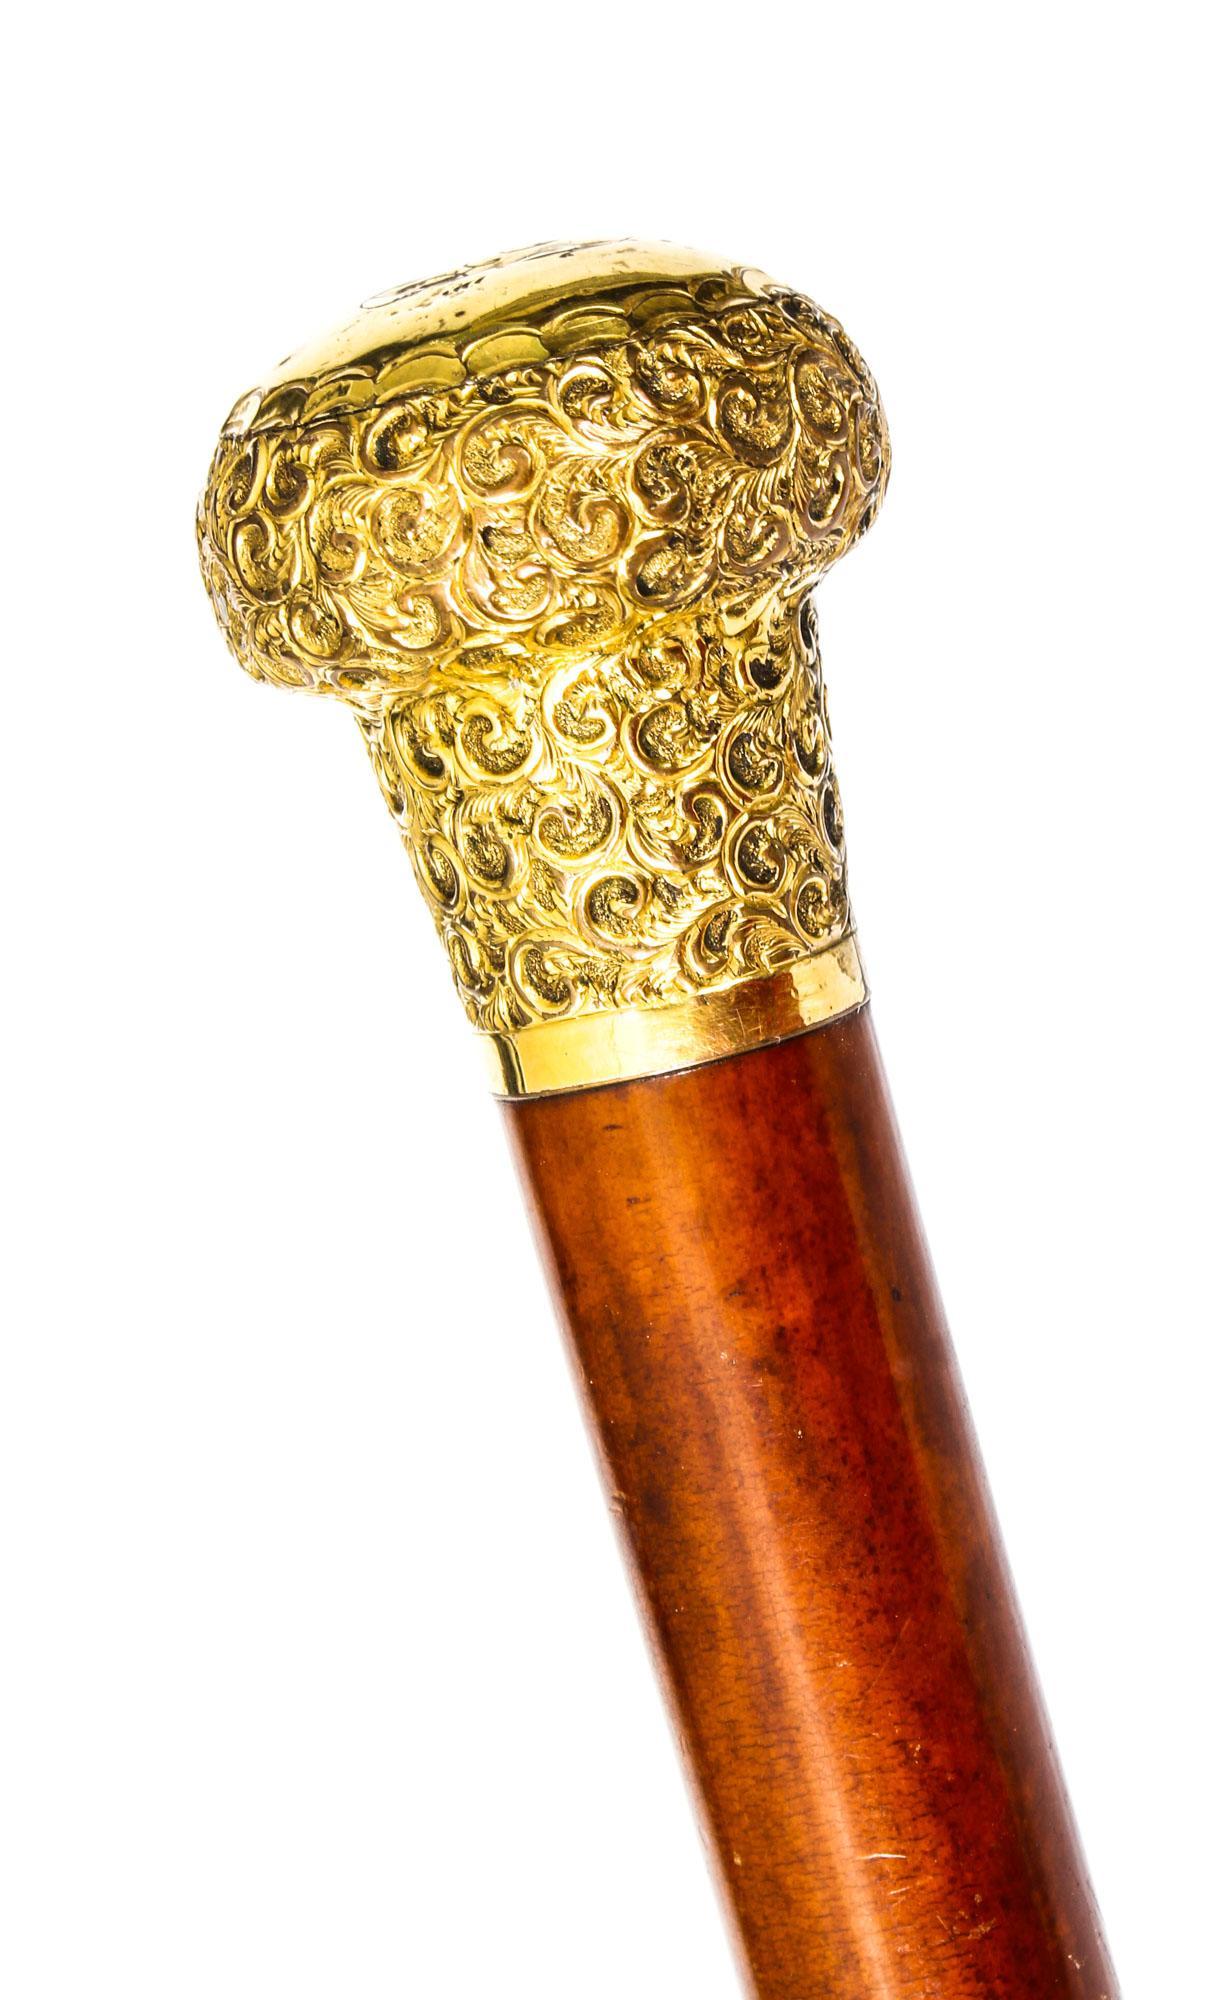 This is a beautiful antique Victorian gentleman's walking cane with a lovely ormolu domed pommel, dating from the late 19th century.
 
The elegant ormolu handle is beautifully chased with foliate and floral decoration and features an engraved